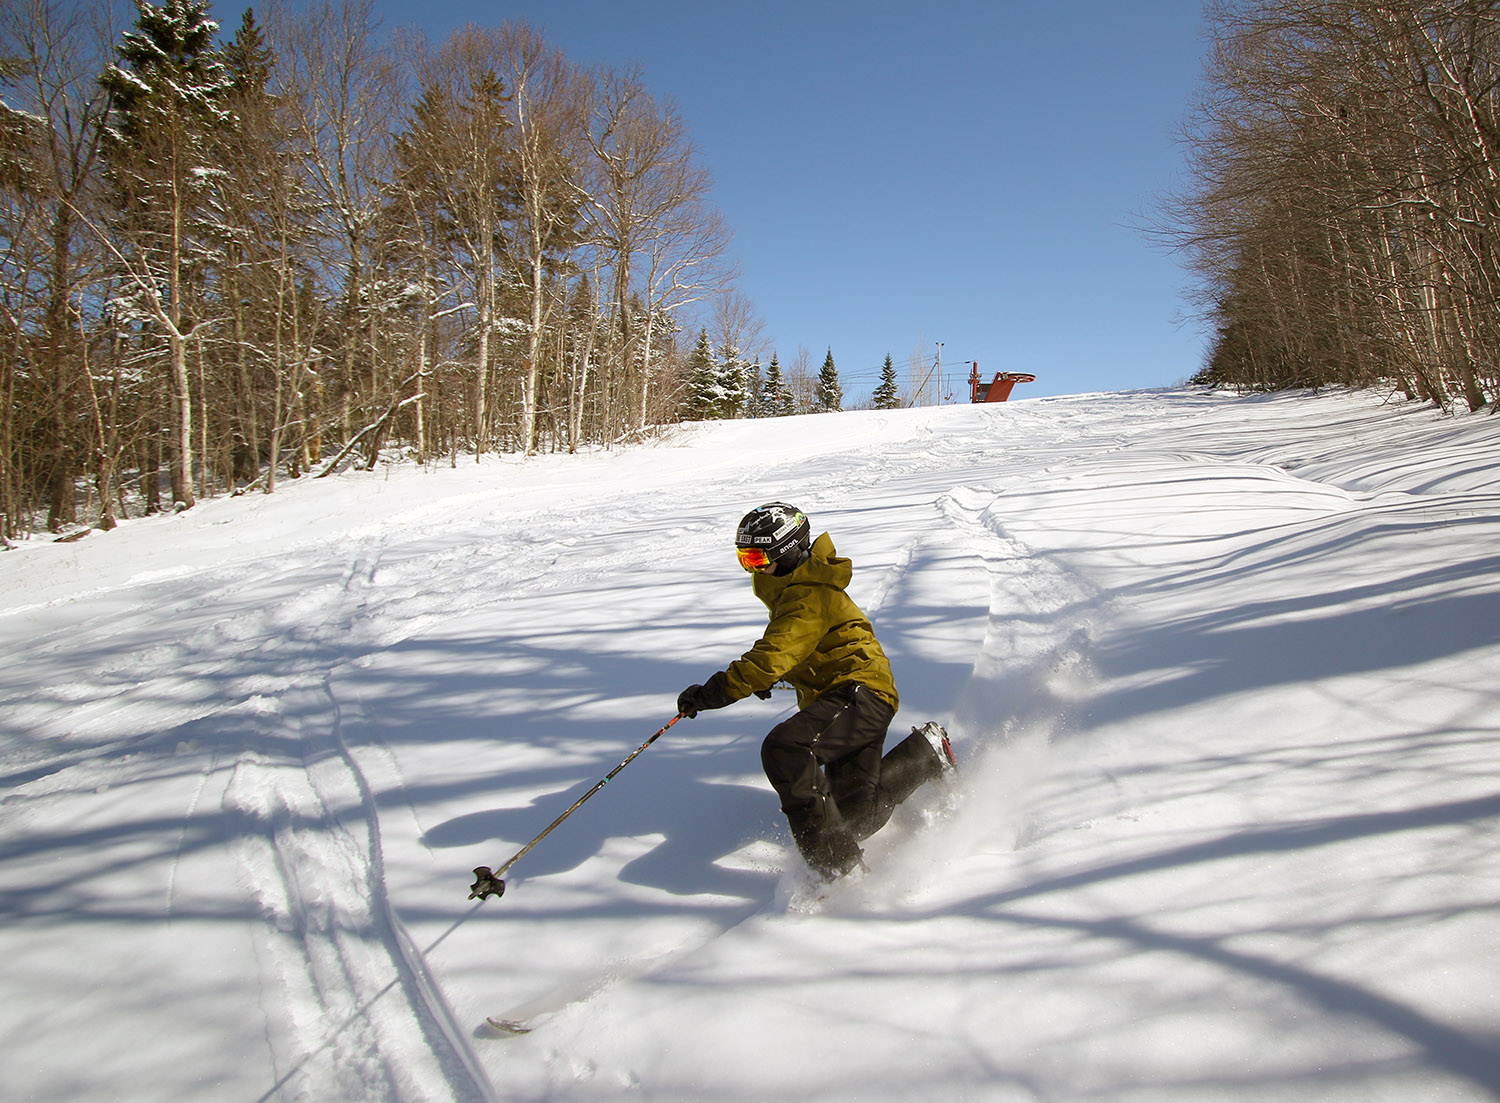 An image of Jay Telemark skiing in powder after an April snowstorm at Bolton Valley Ski Resort in Vermont